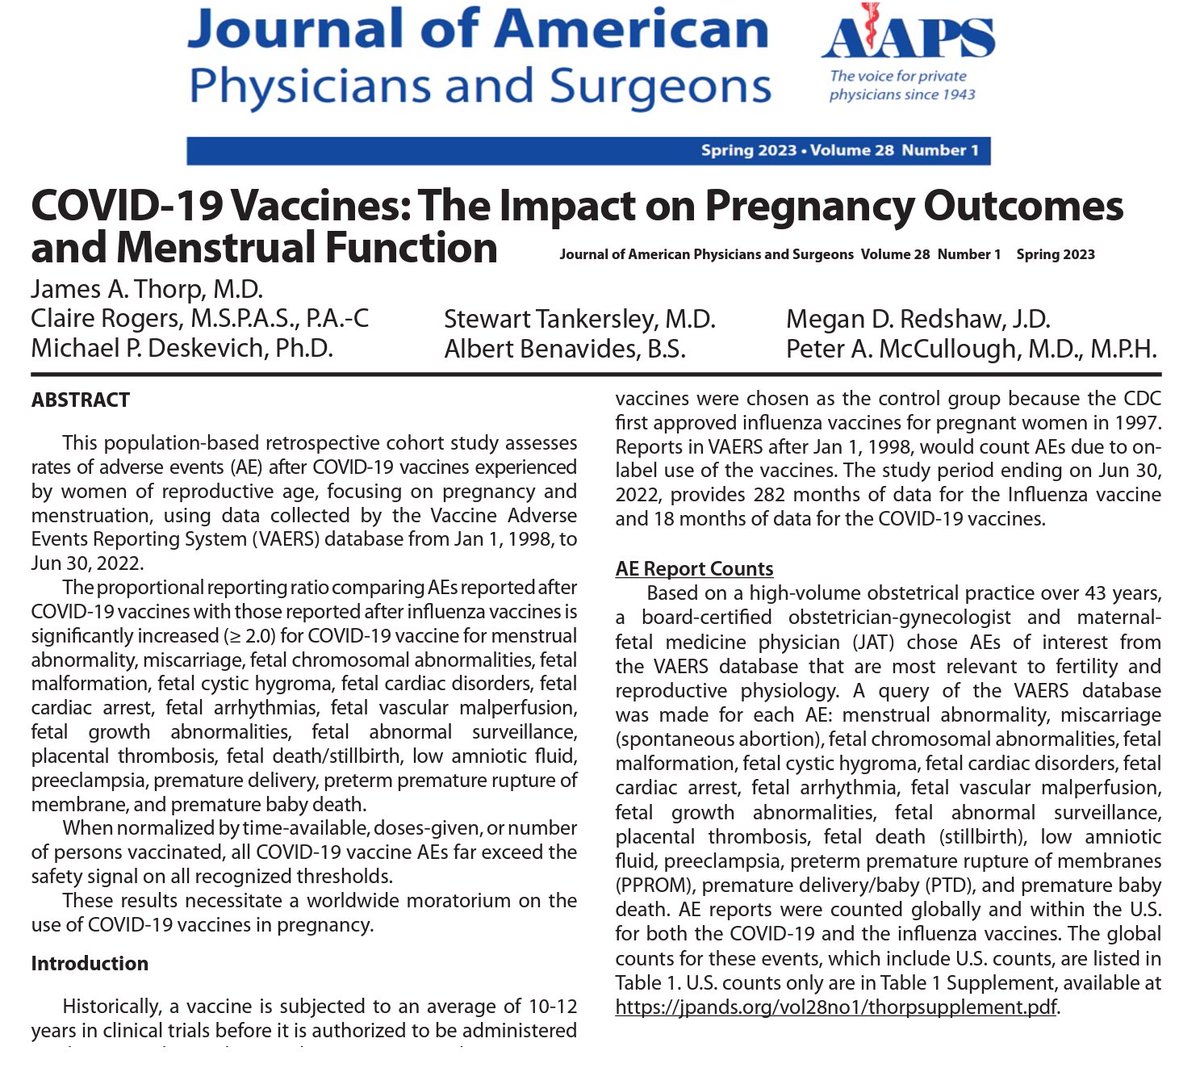 @Jikkyleaks @DrGregorSmith All data suggest C19 vaccines worsen fertility--not help it. 65% of mothers took mRNA injections in 2021 and maternal mortality skyrocketed! For a fertility program to force C19 vax on healthy partners was a crime. @acog @ACOGAction @ACOGPregnancy @ASRM_org @seantipton